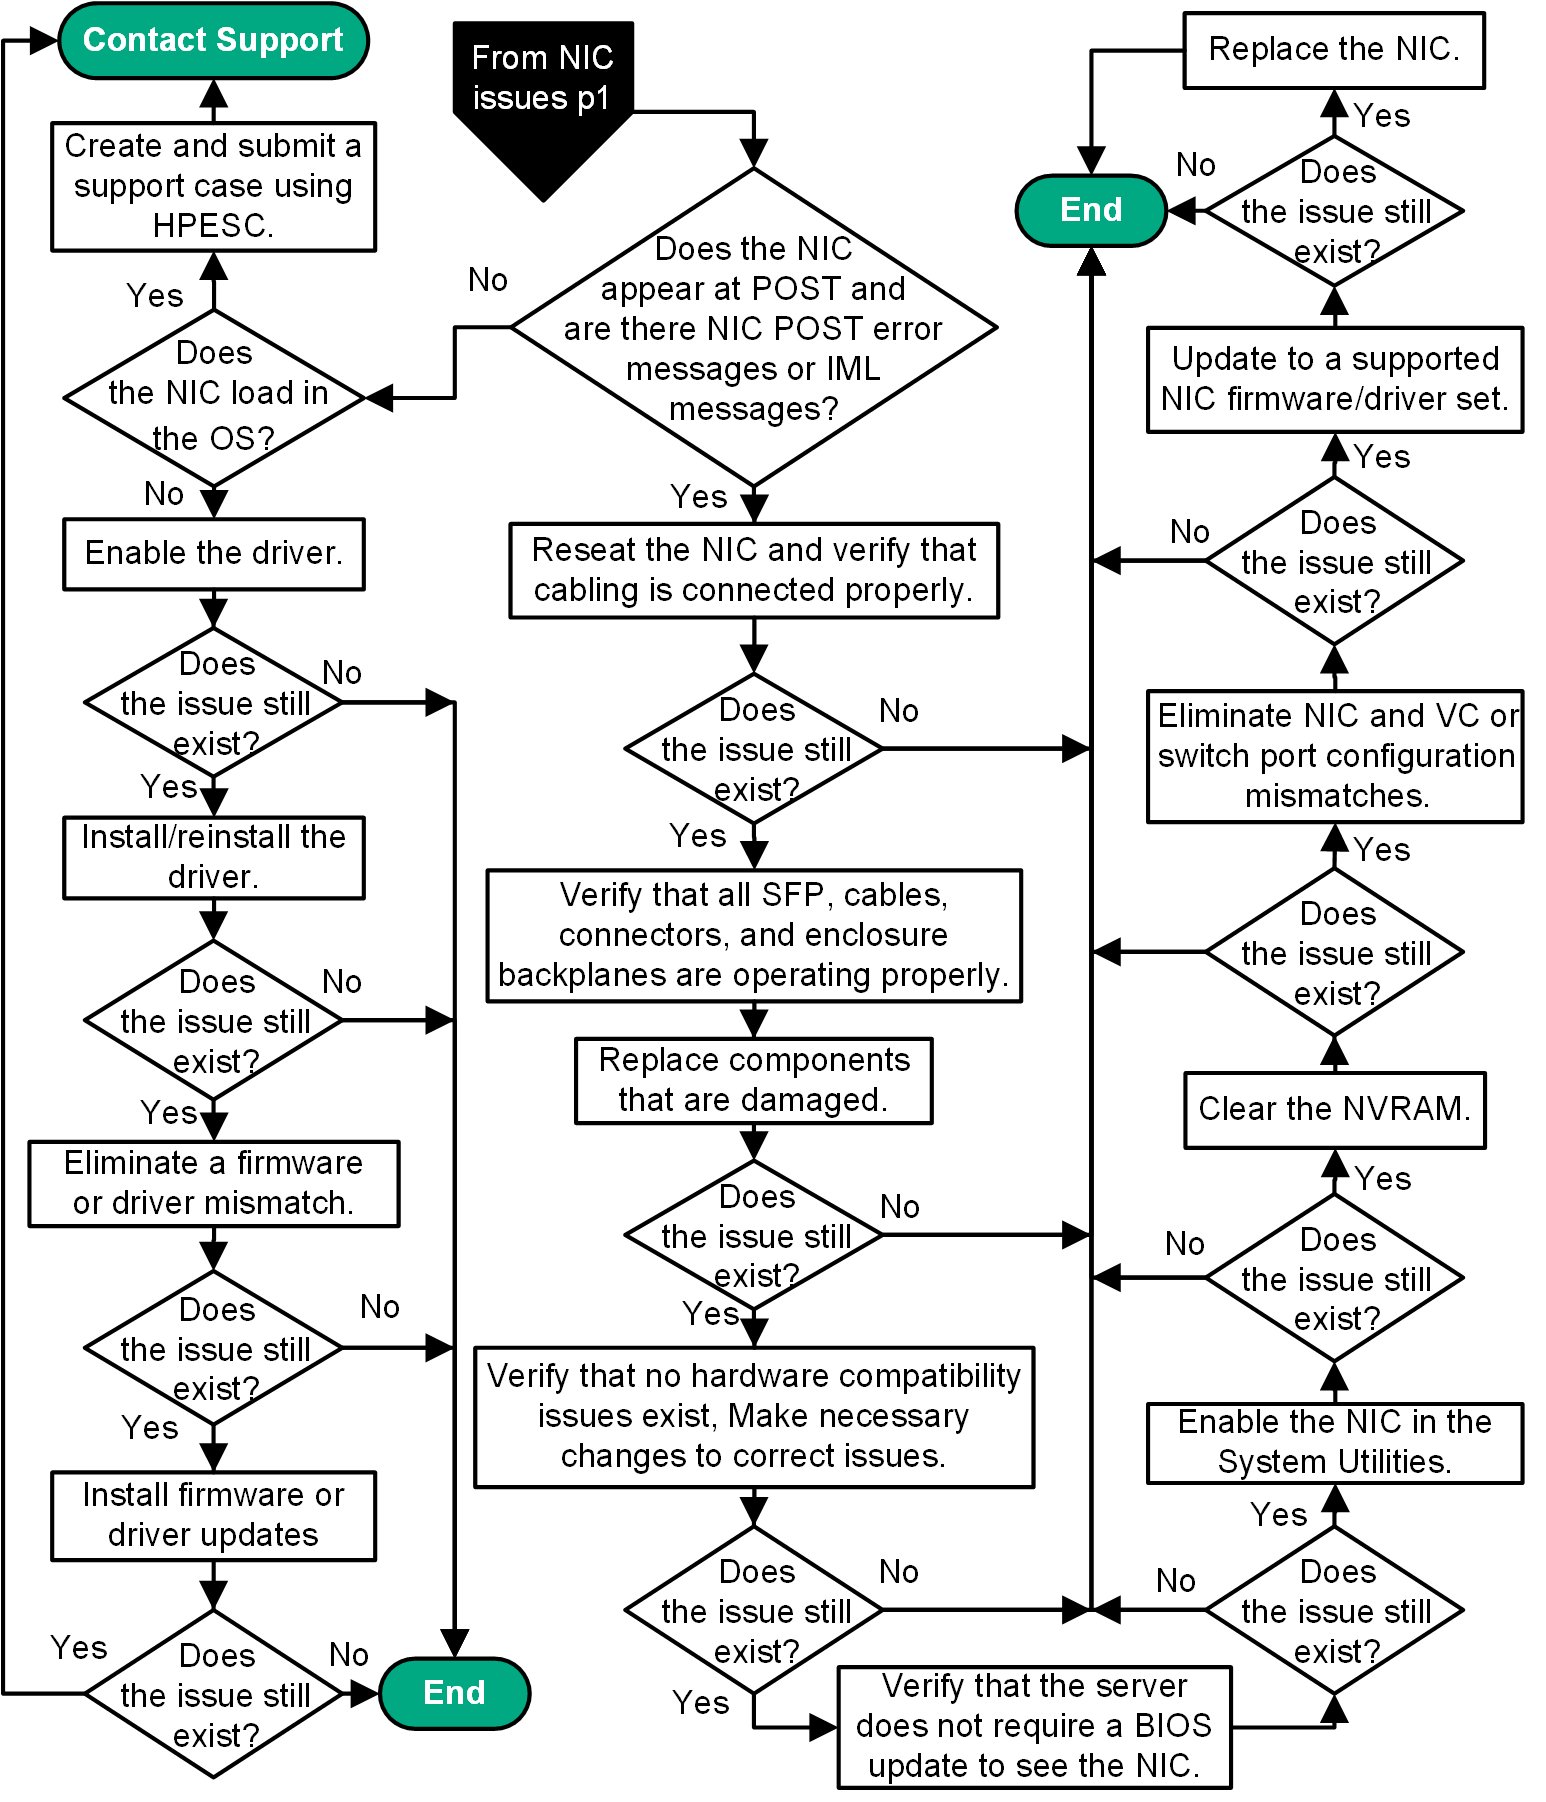 NIC issues flowchart (2 of 2)